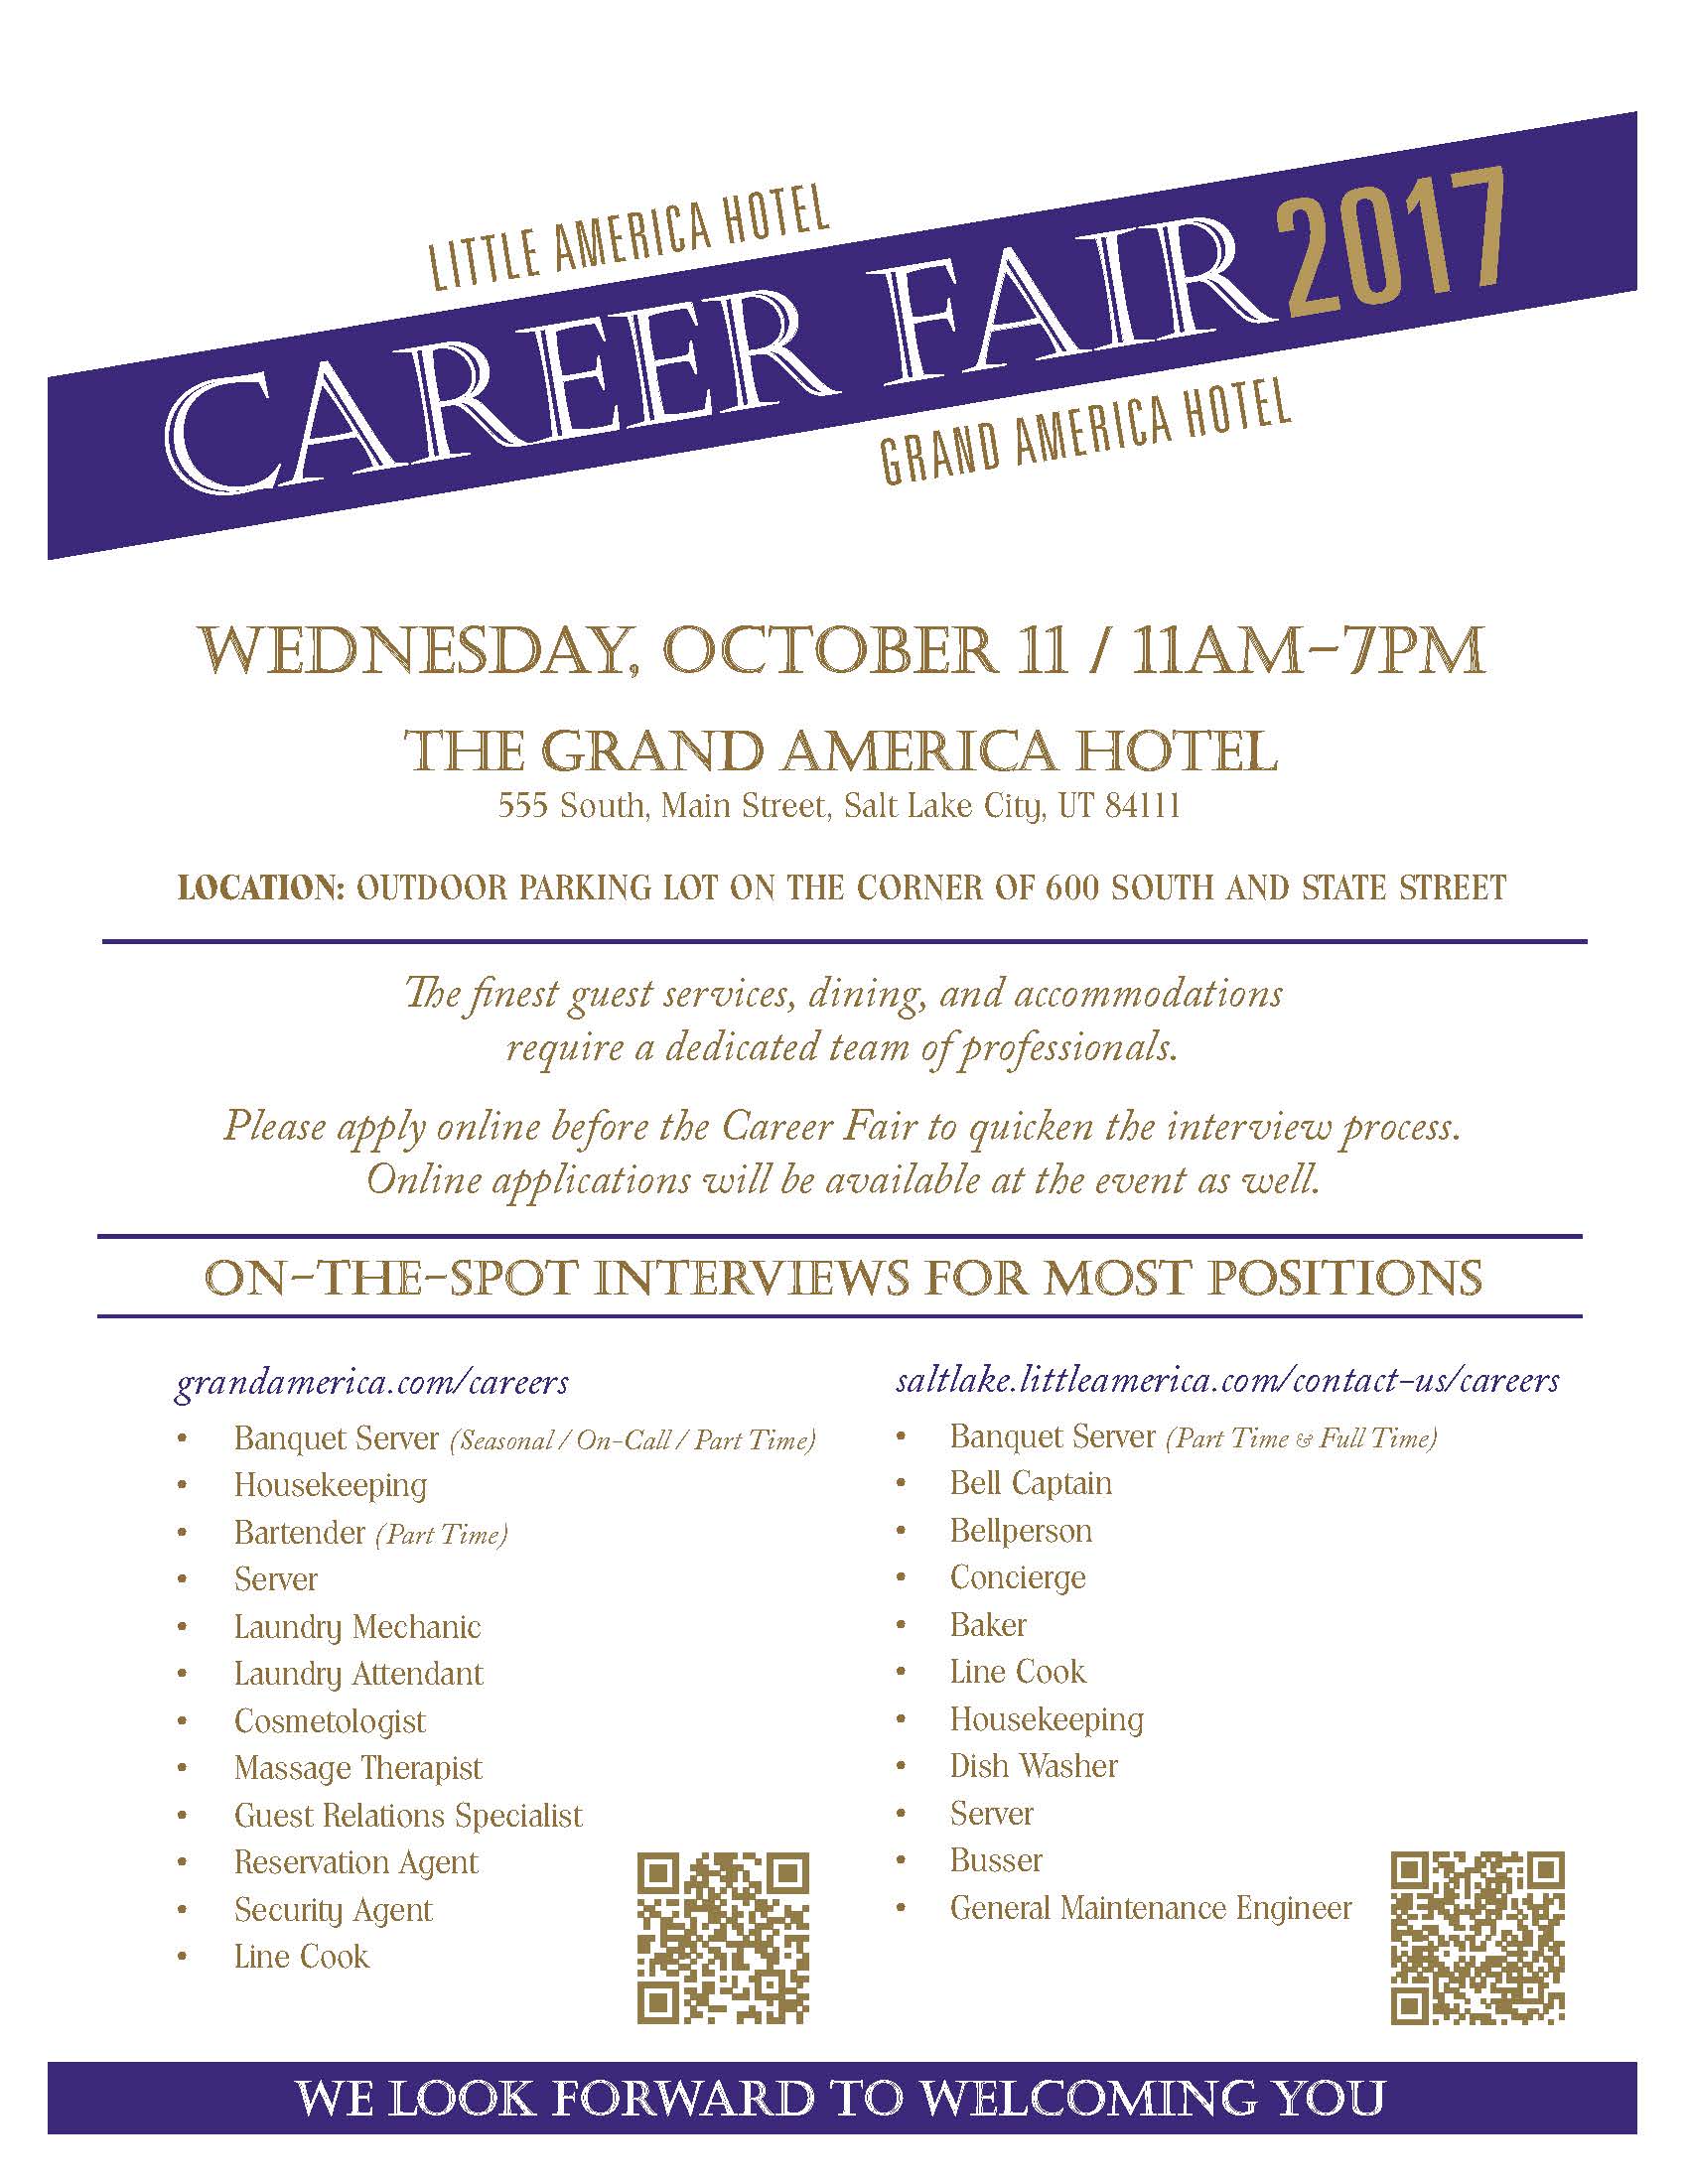 2017 Grand America Career fair poster with available positions.